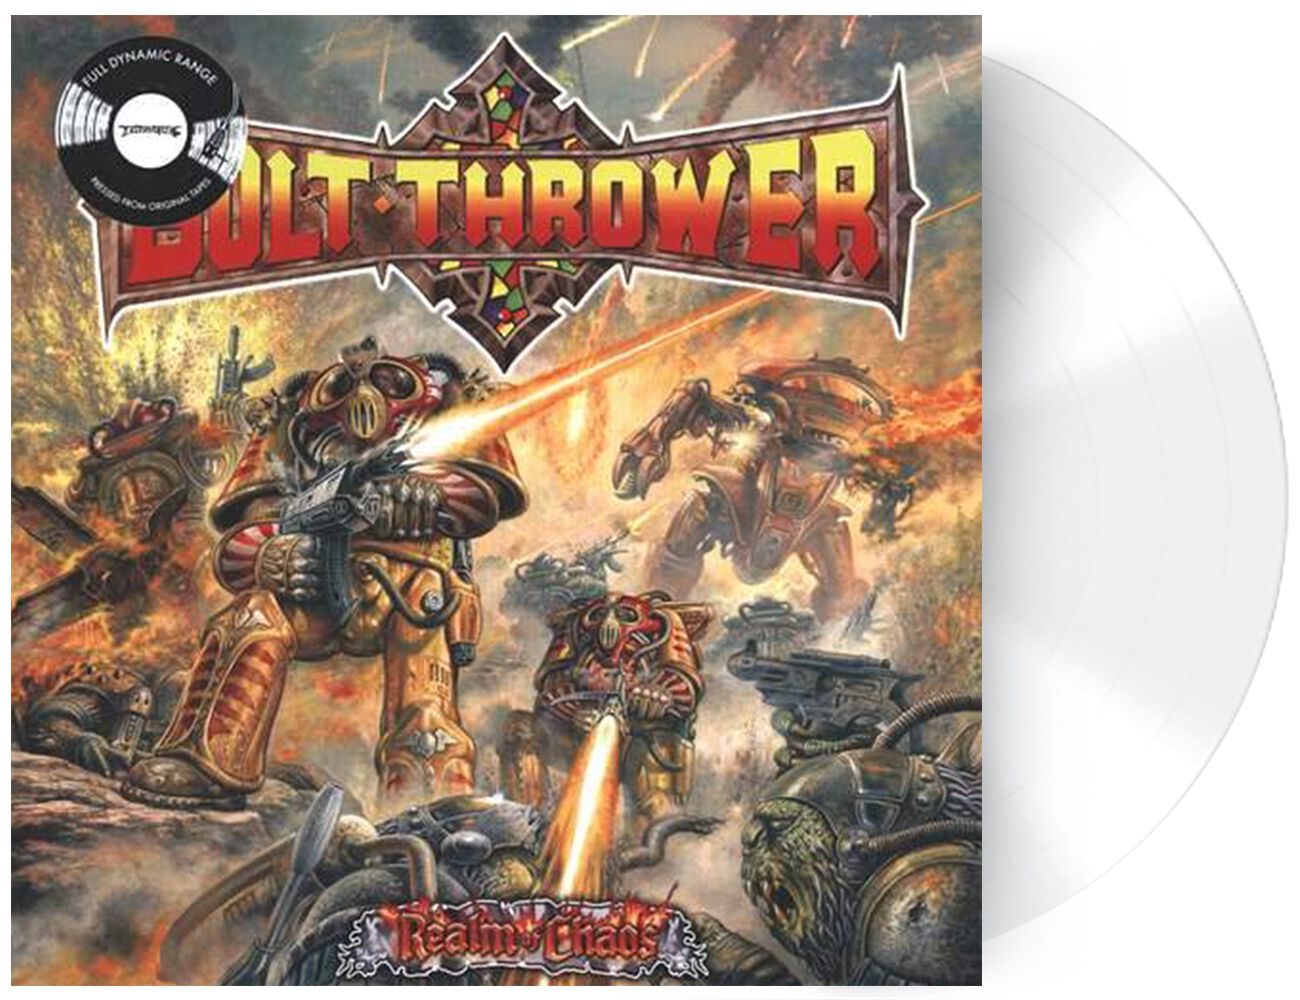 Bolt Thrower Realm of chaos LP white